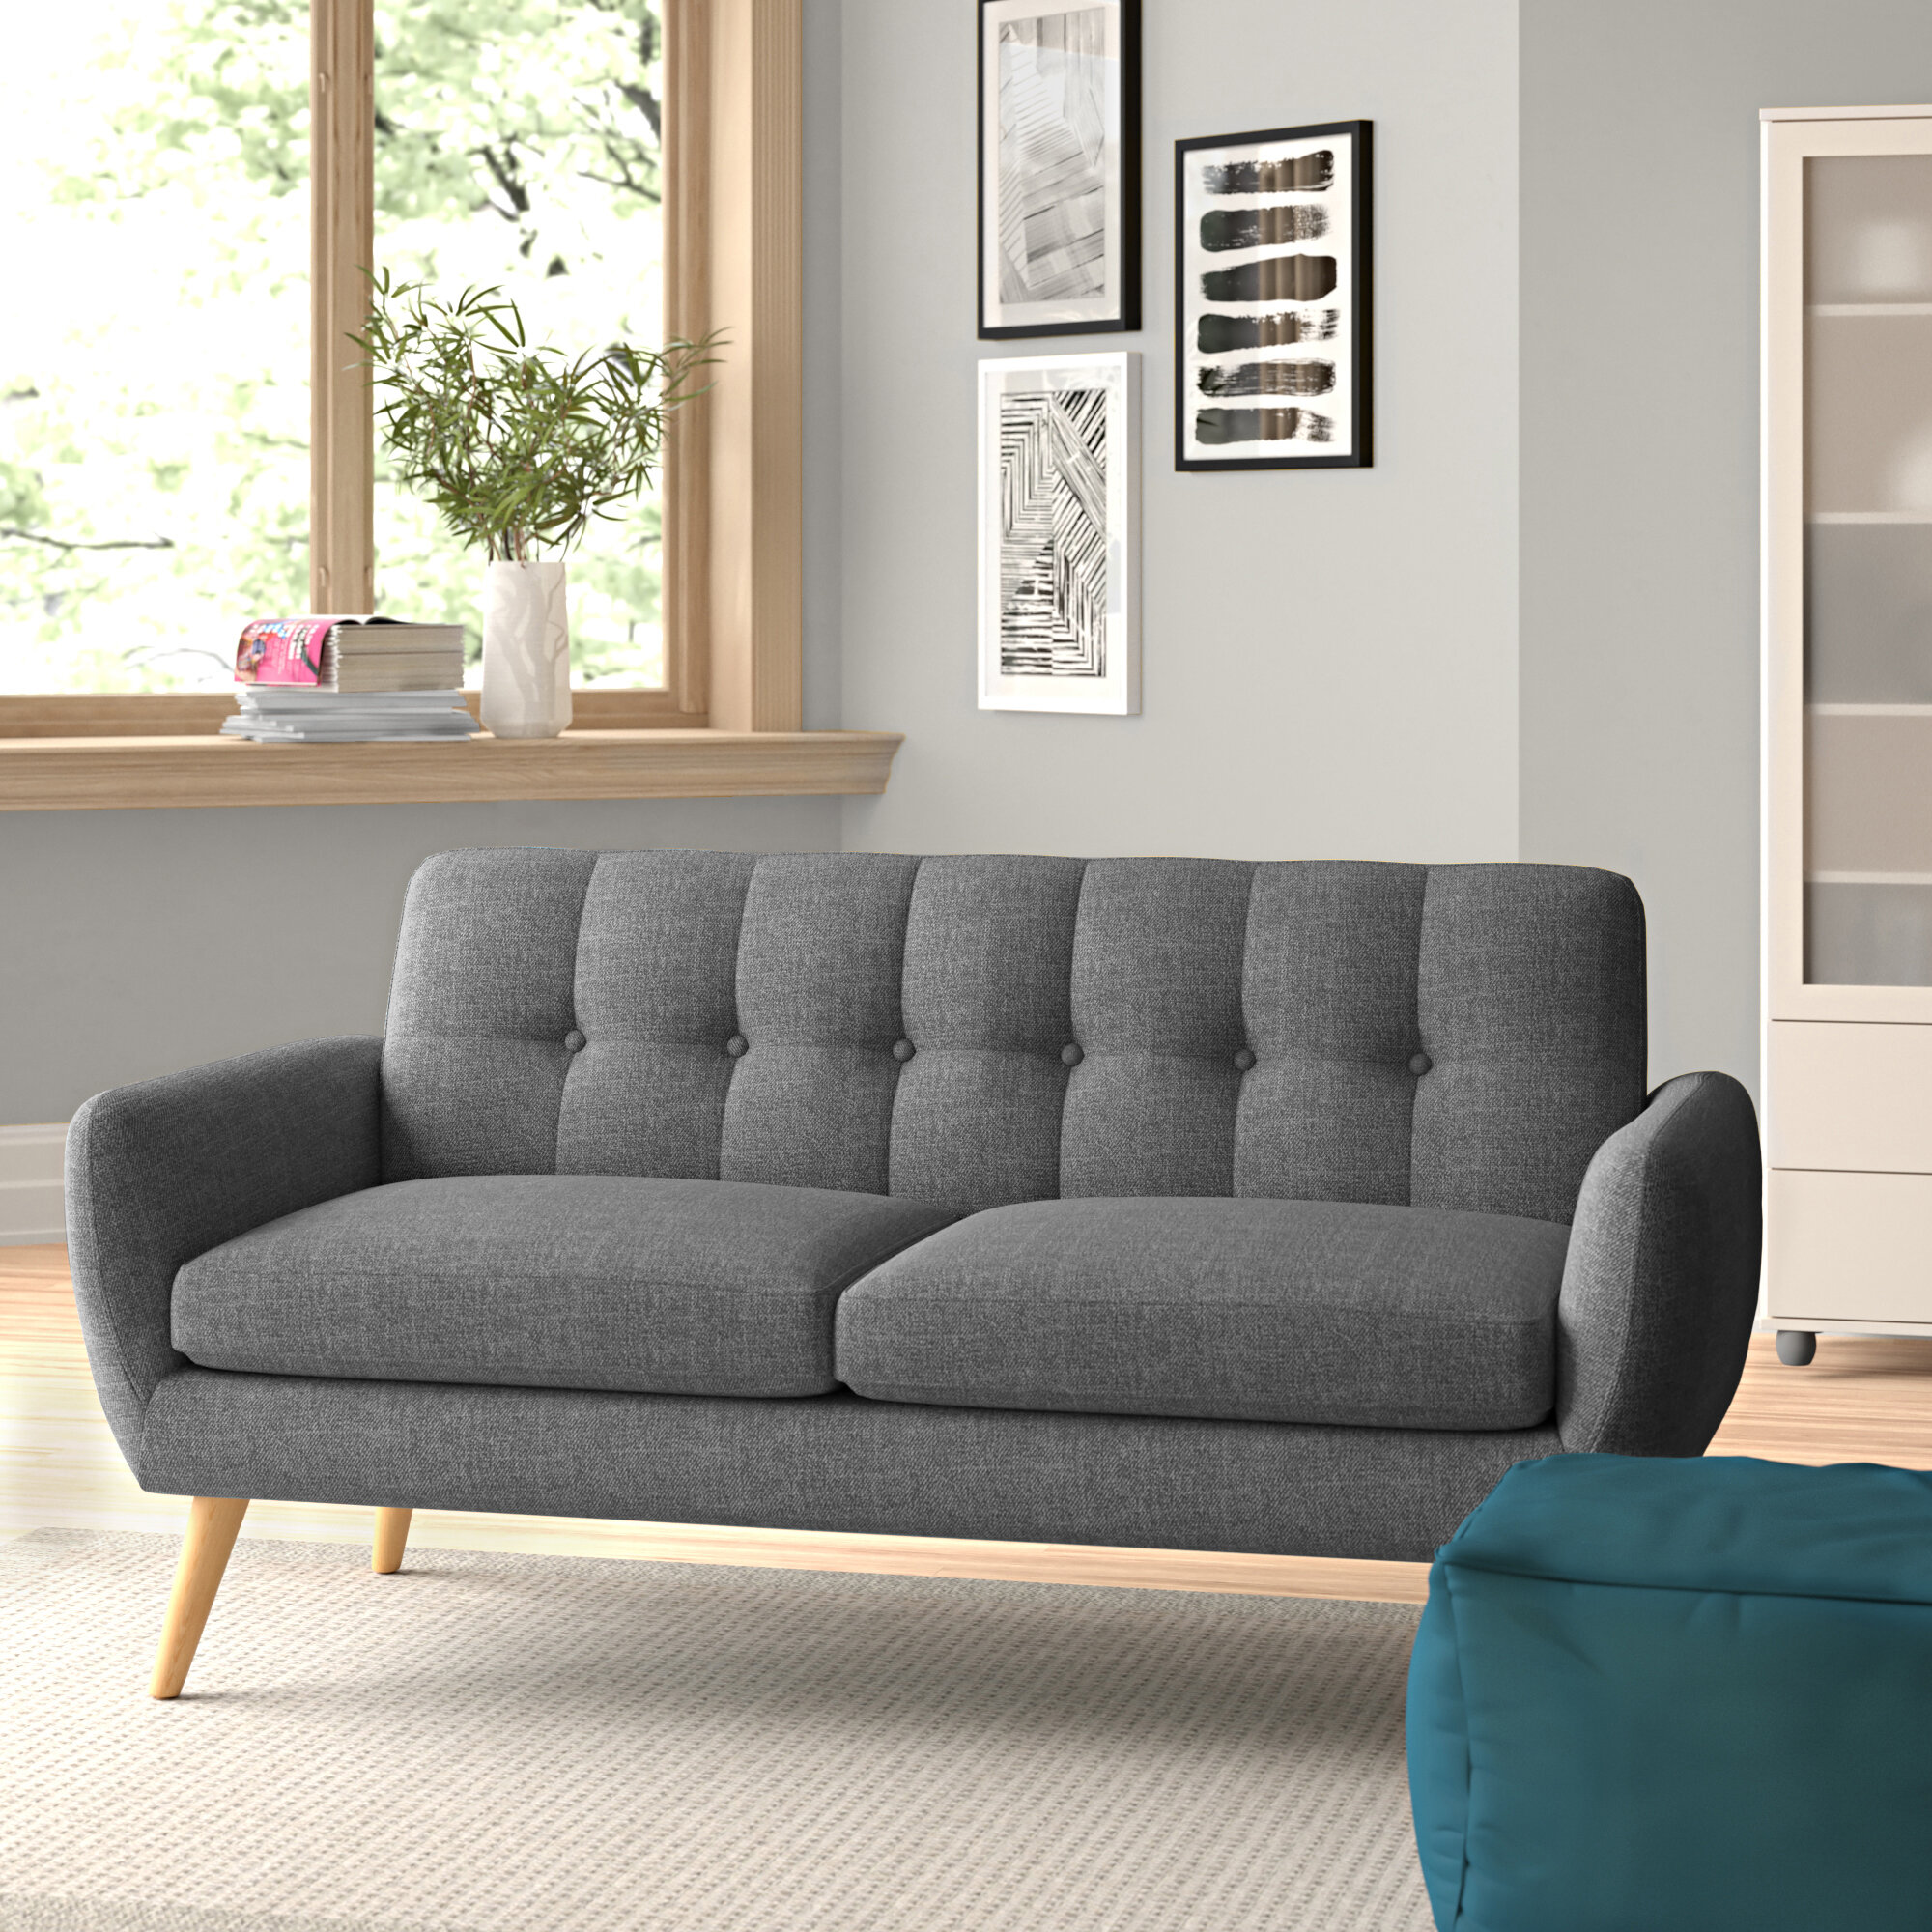 Grey, 2 Seater Panana 2 Seater Sofa Linen Fabric Modern Sofa Settee Couch for Living Room Home Furniture In Choice of 3 Stylish Colours